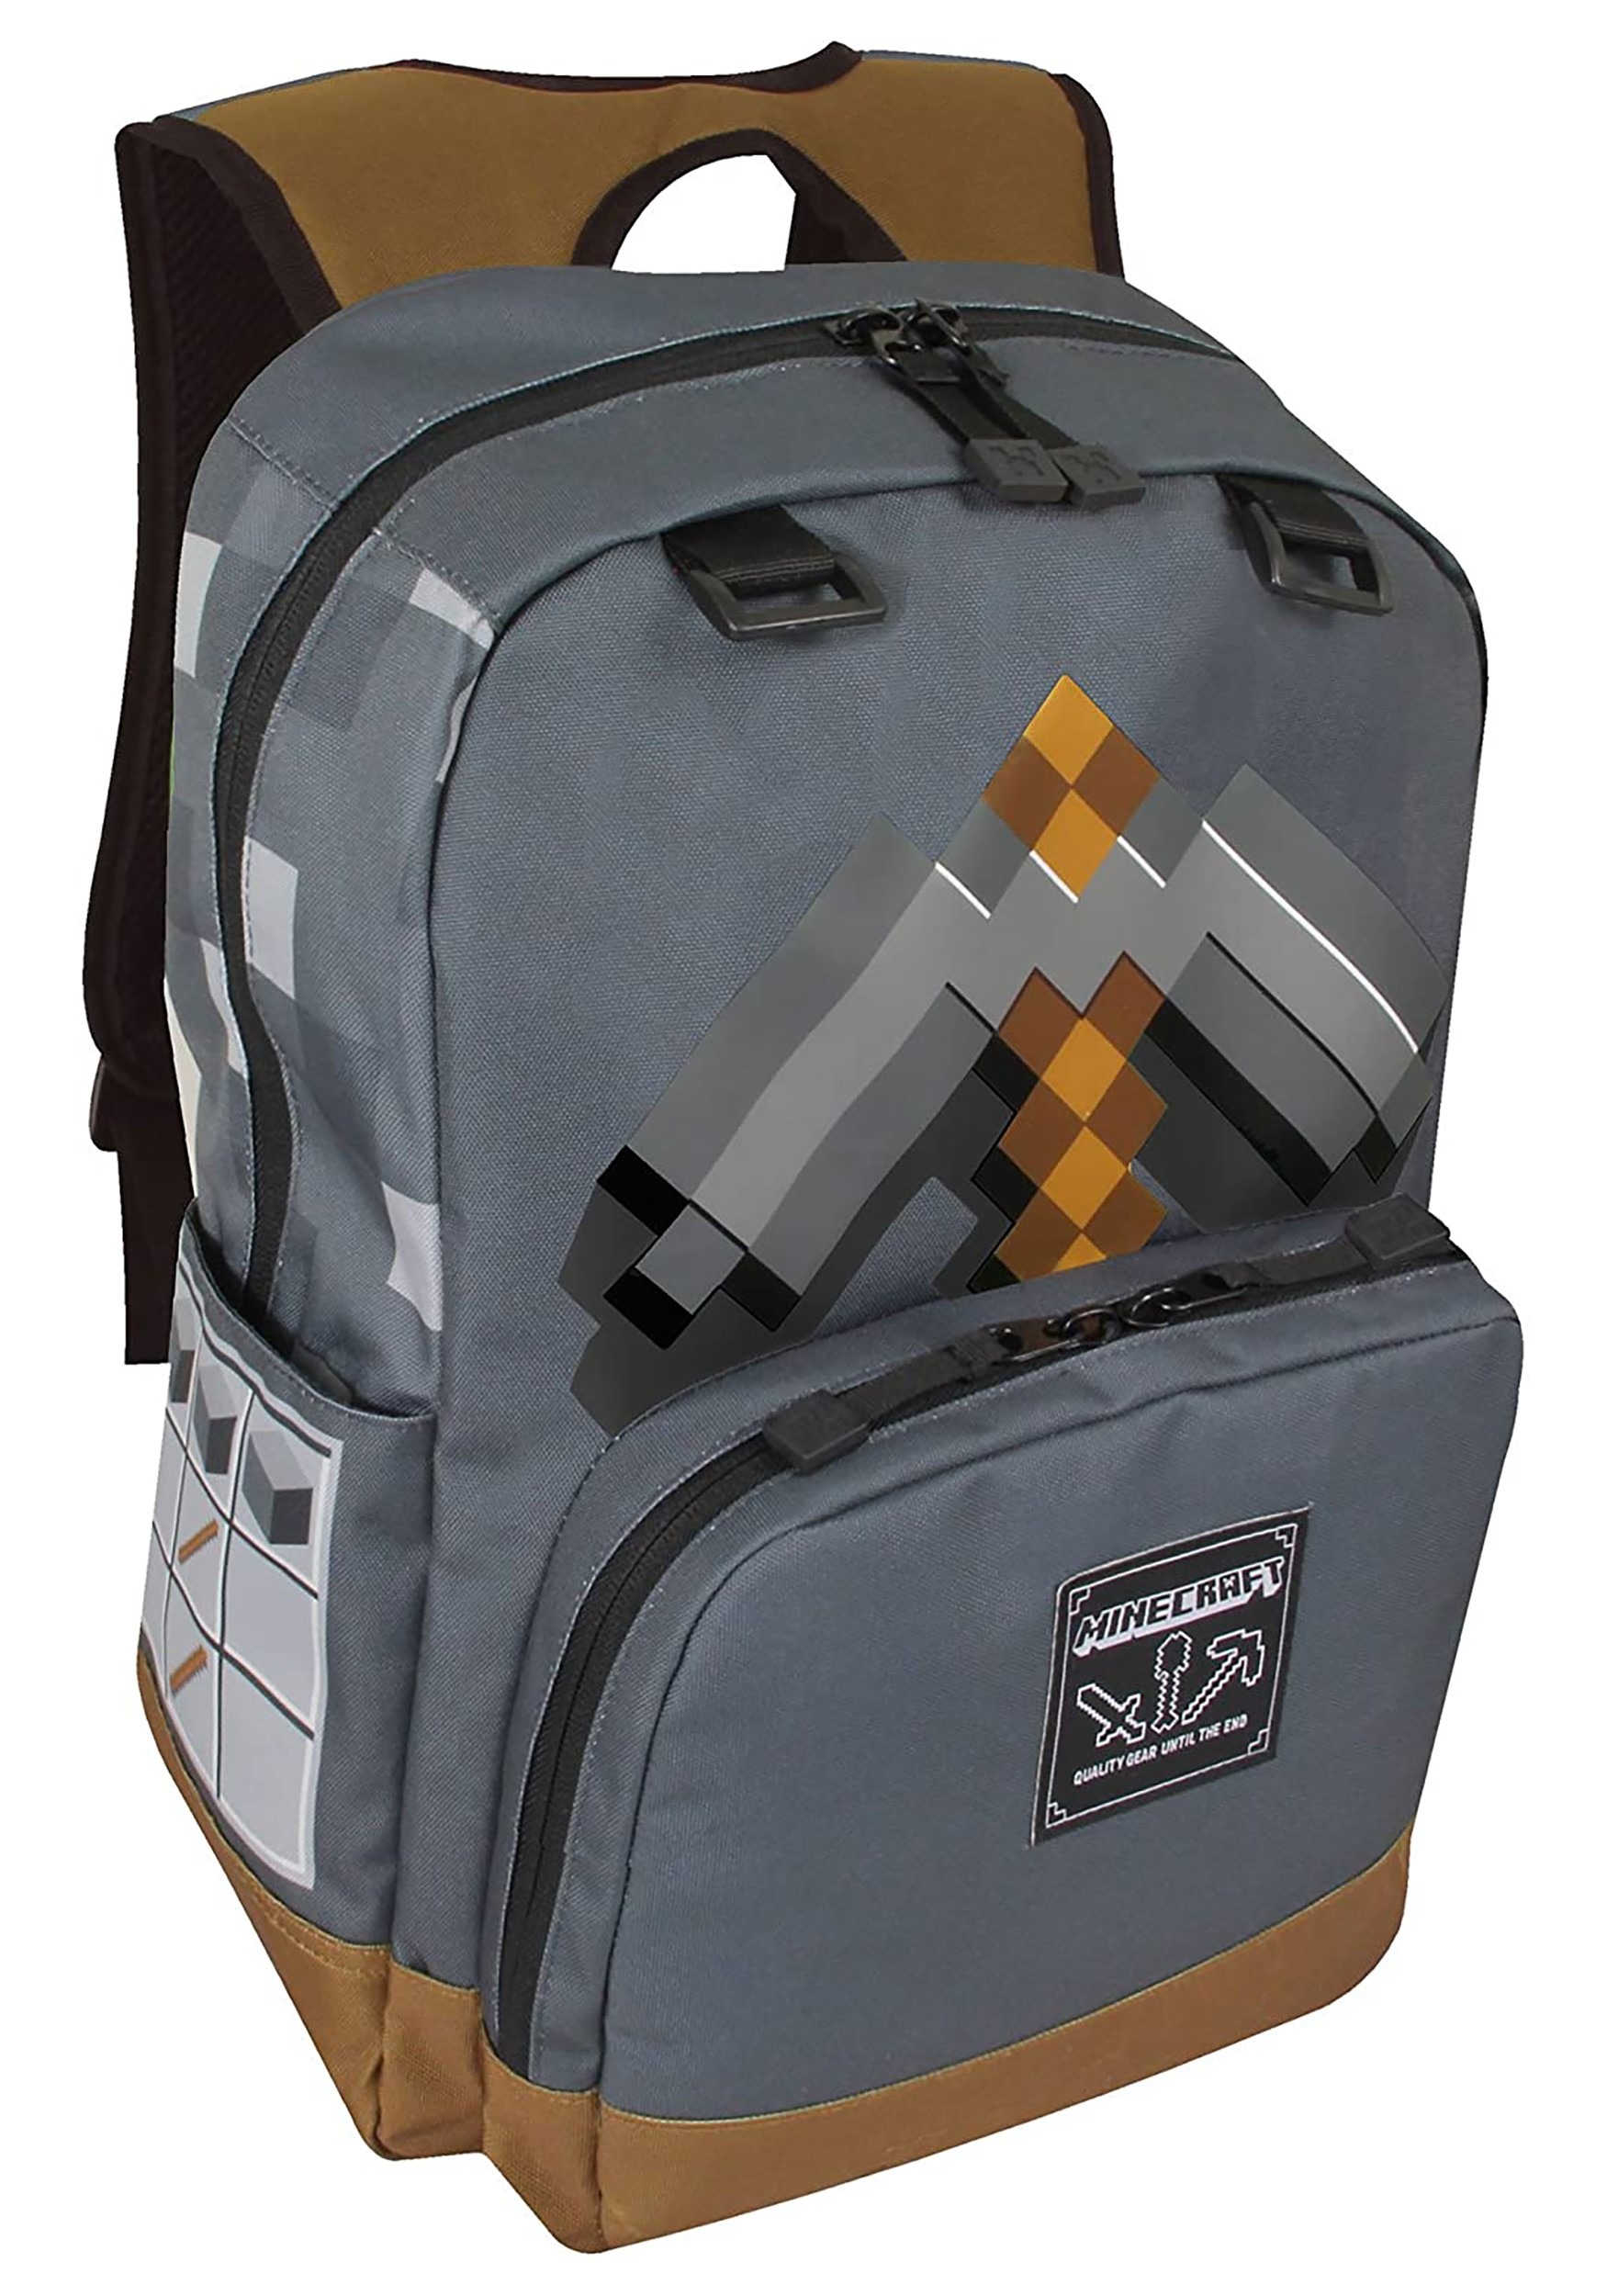 Mine craft Pickaxe Adventure Backpack